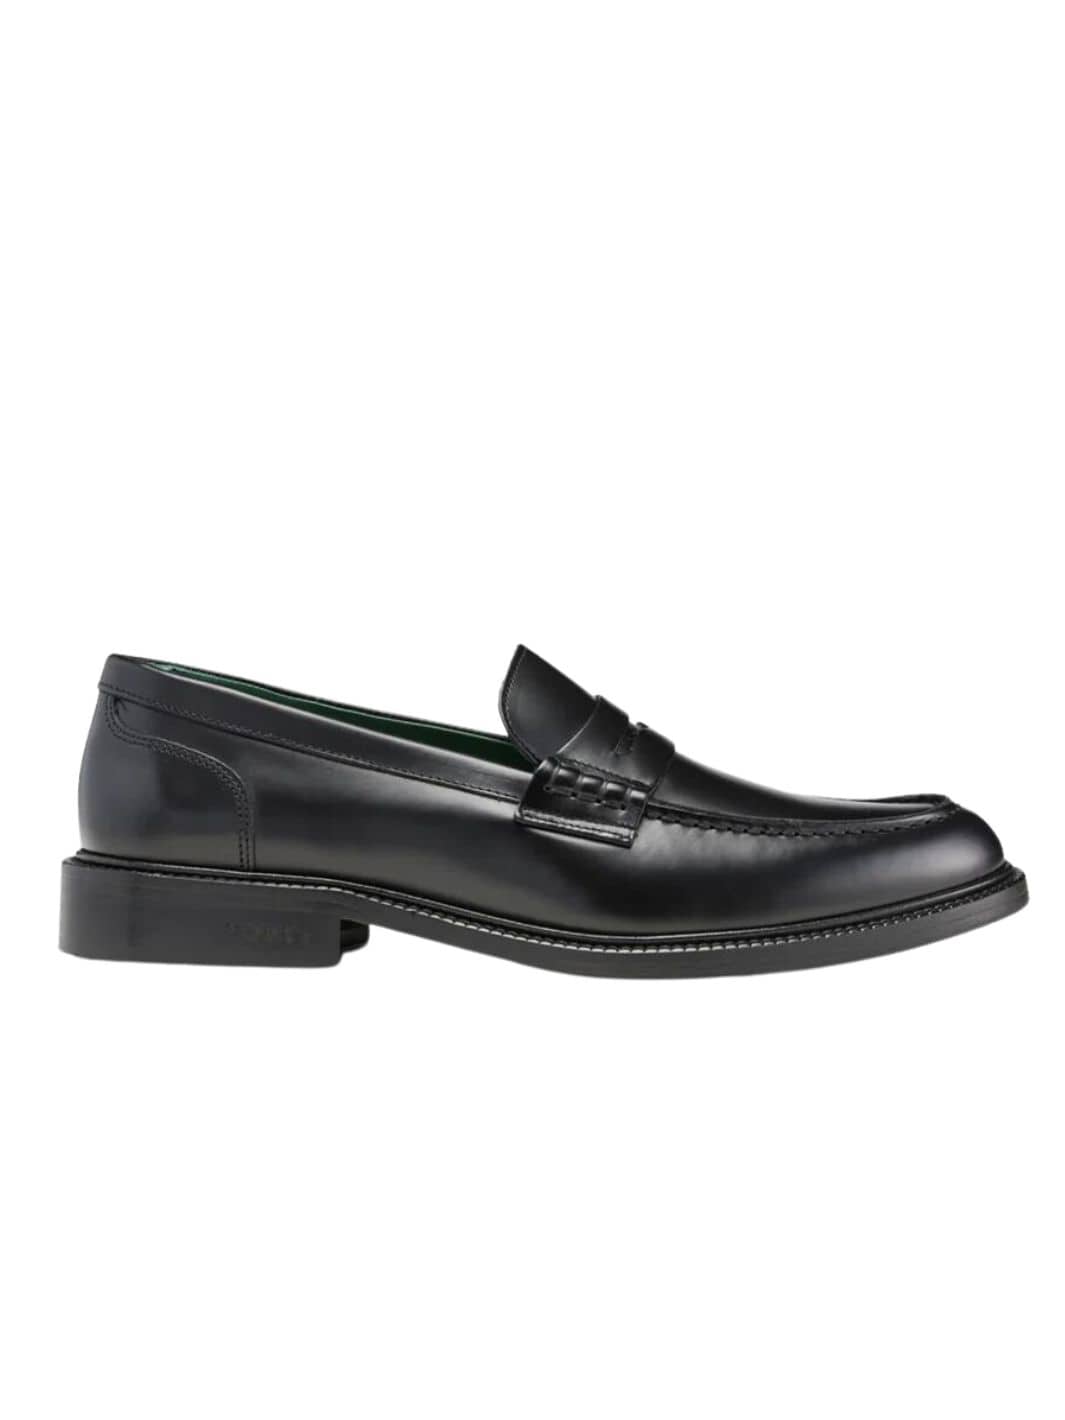 Vinny's Shoes Loafers | Townee Penny Polido Leather Black